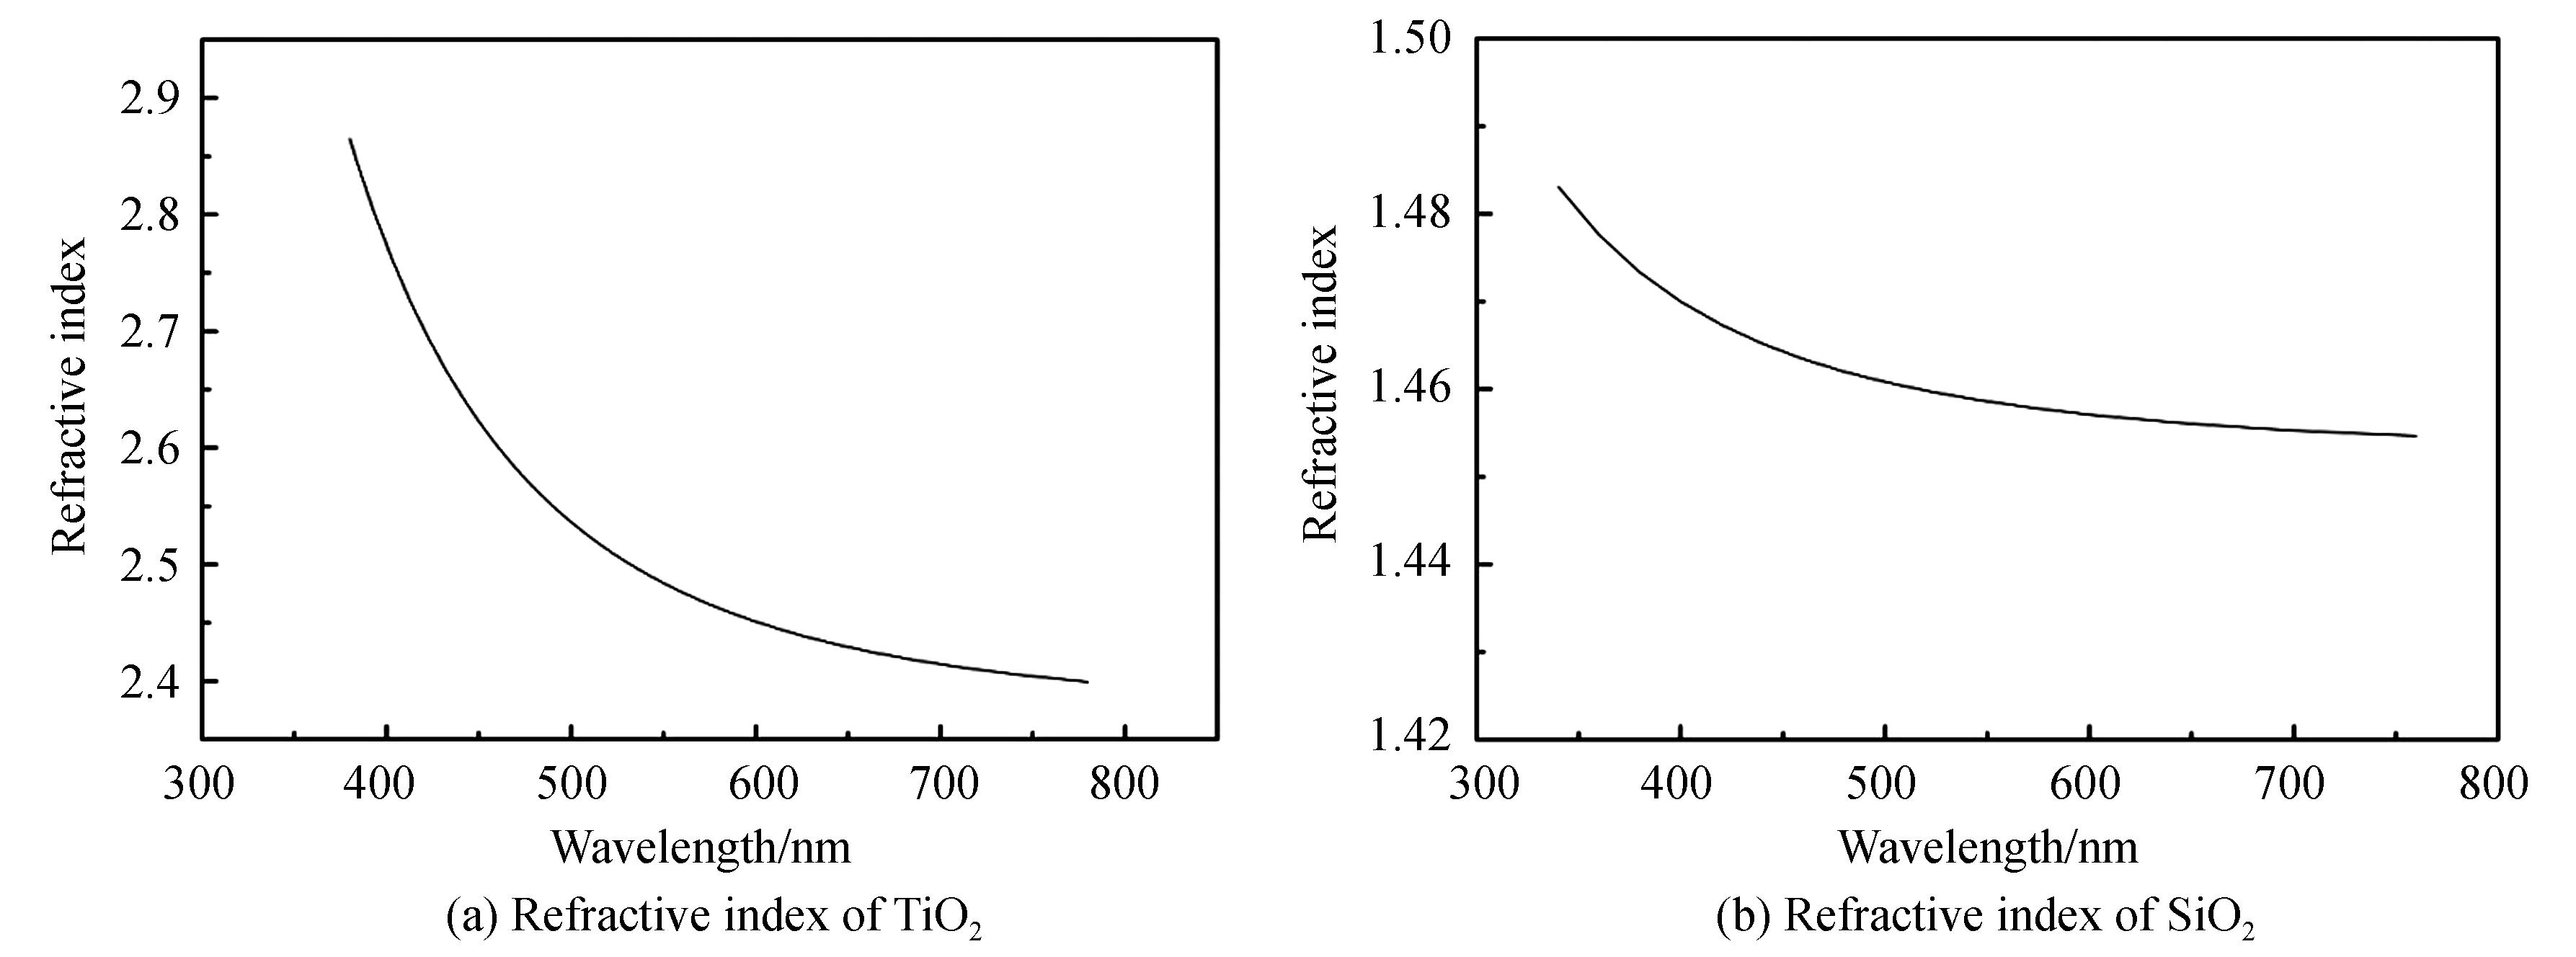 Refractive index of two materials